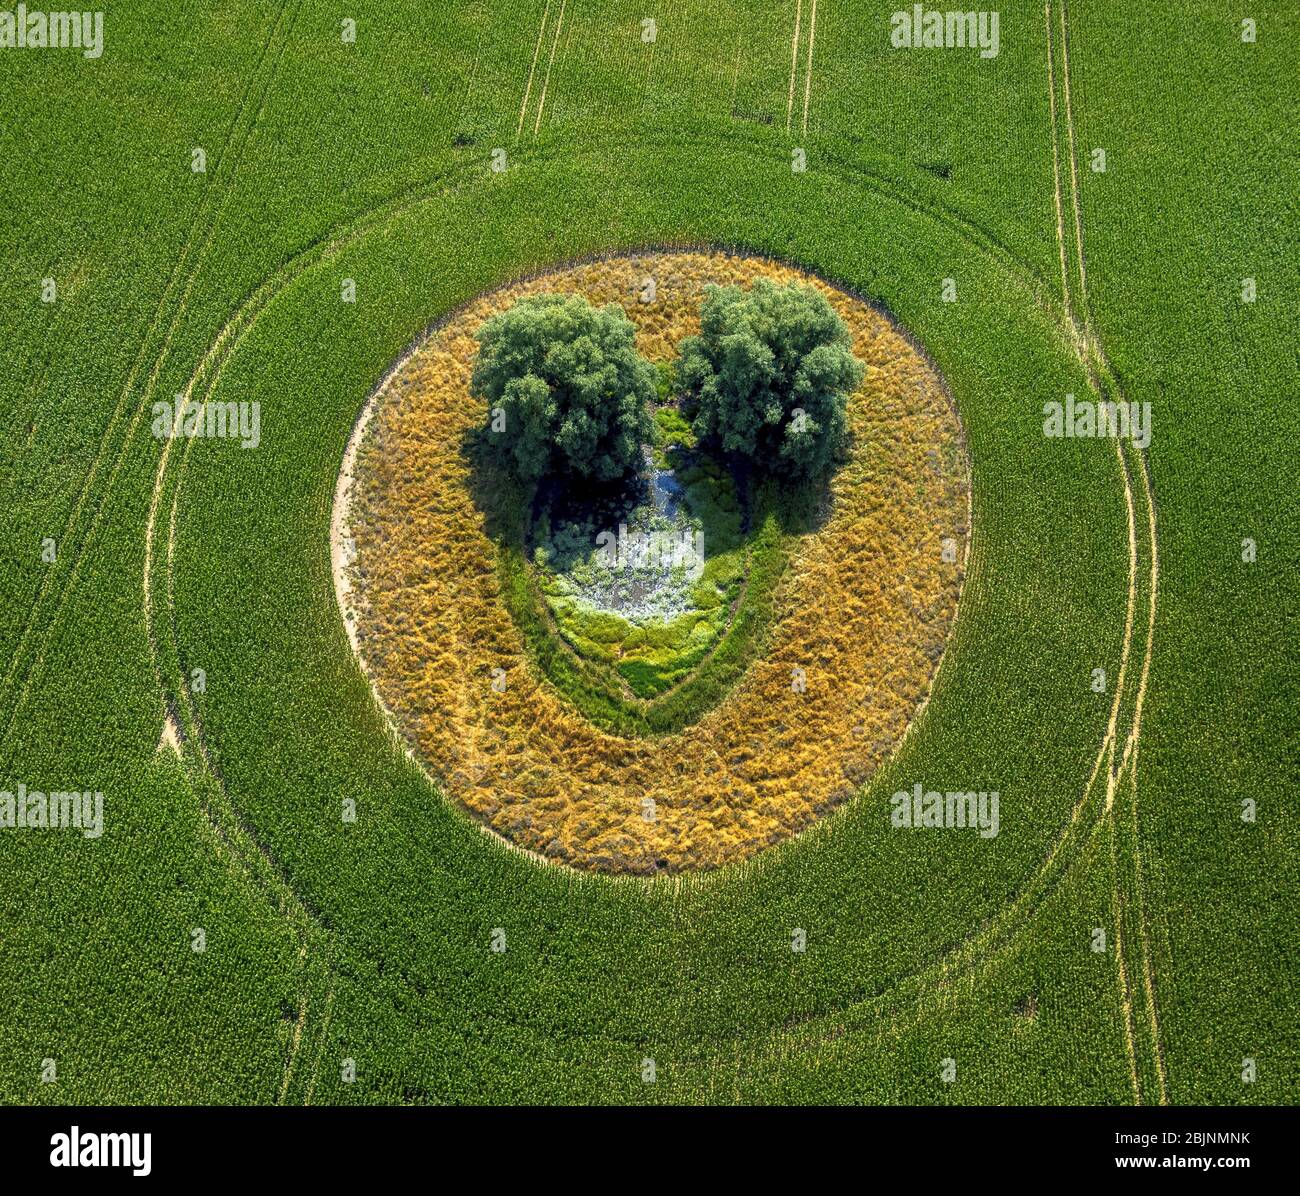 island in a corn field with pond an two trees in Duckow, 24.07.2016, aerial view, Germany, Mecklenburg-Western Pomerania, Duckow Stock Photo